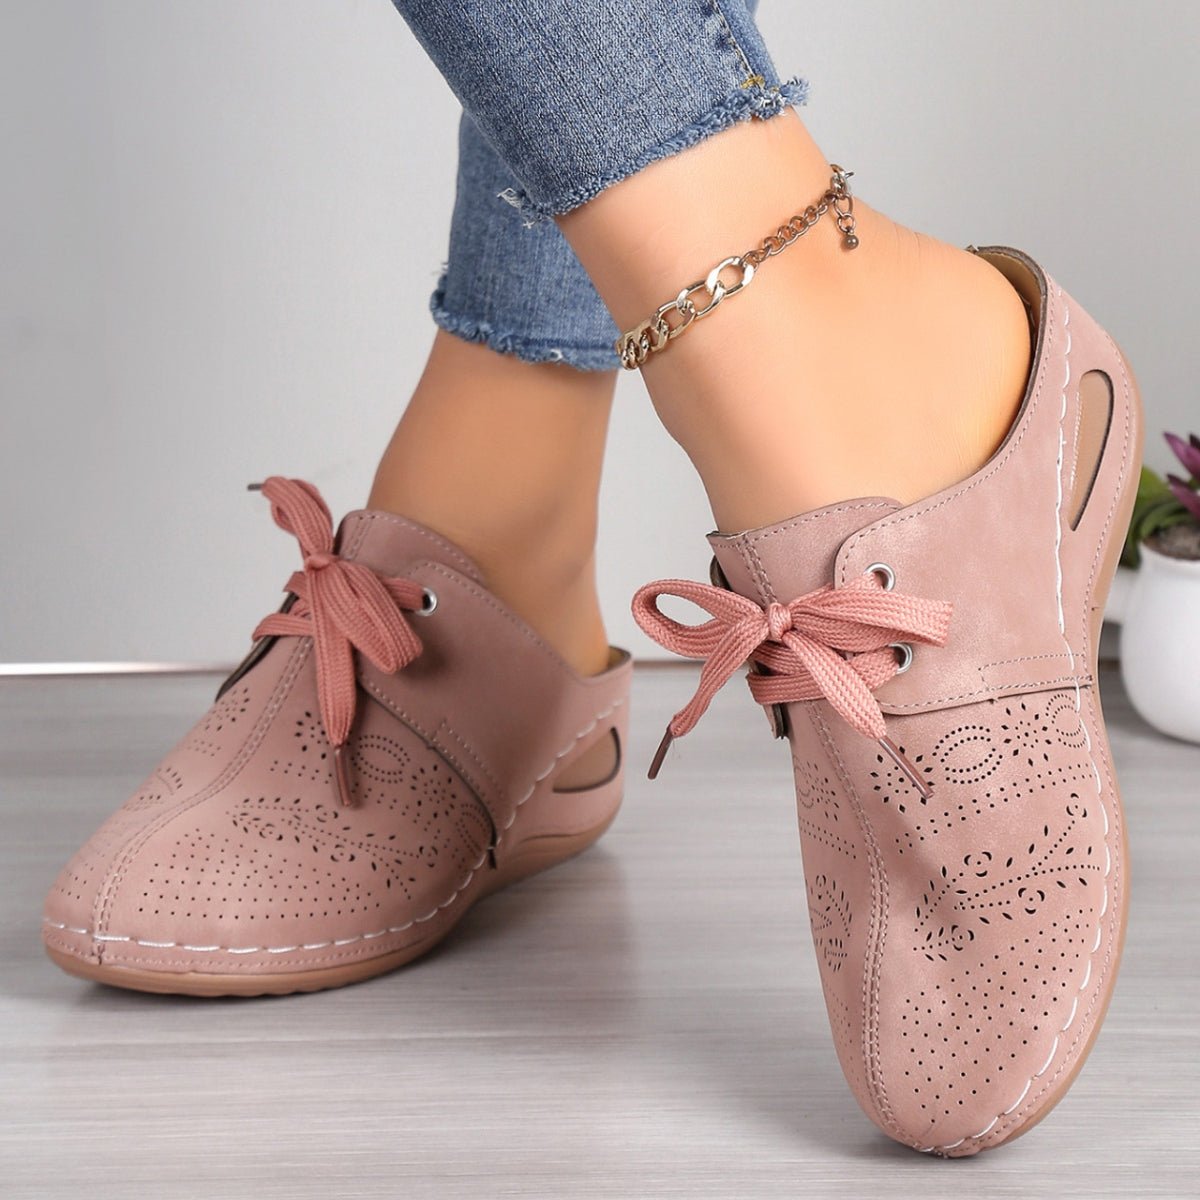 Lace - Up Round Toe Wedge Sandals - OMG! Rose